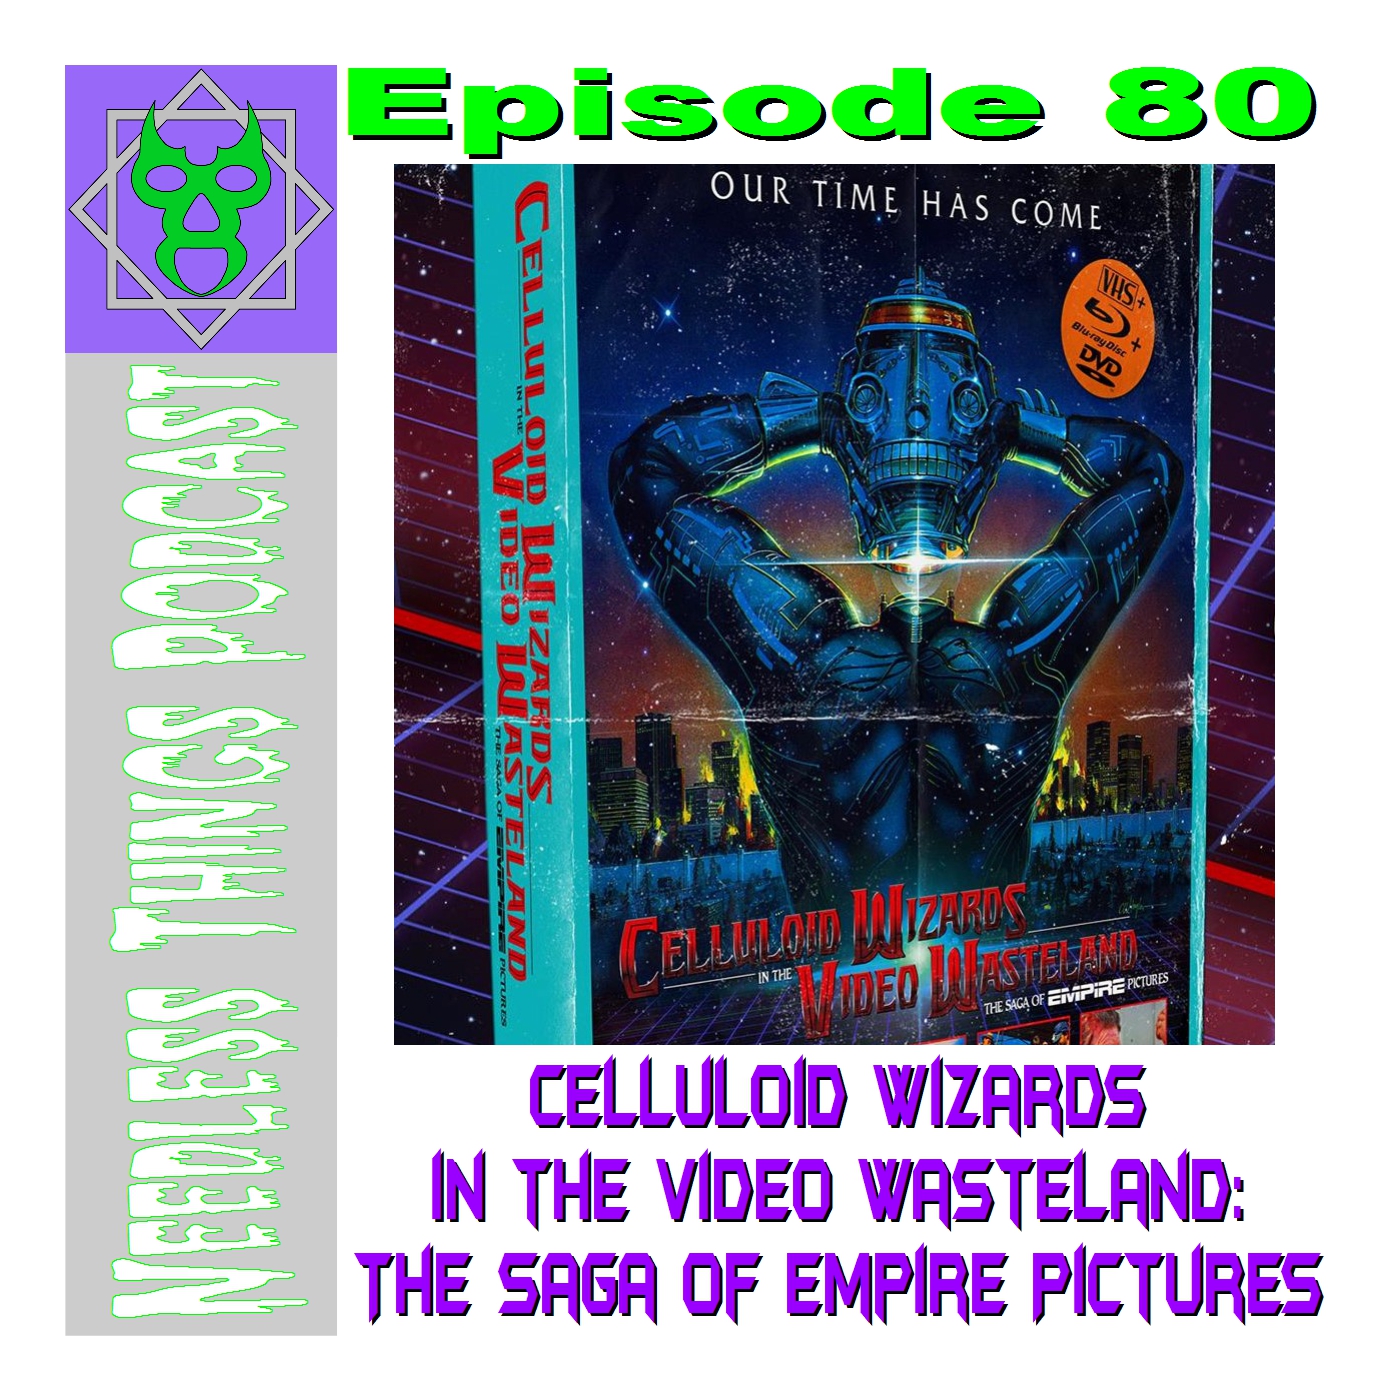 Needless Things Podcast 80 – Celluloid Wizards in the Video Wasteland: The Saga of Empire Pictures